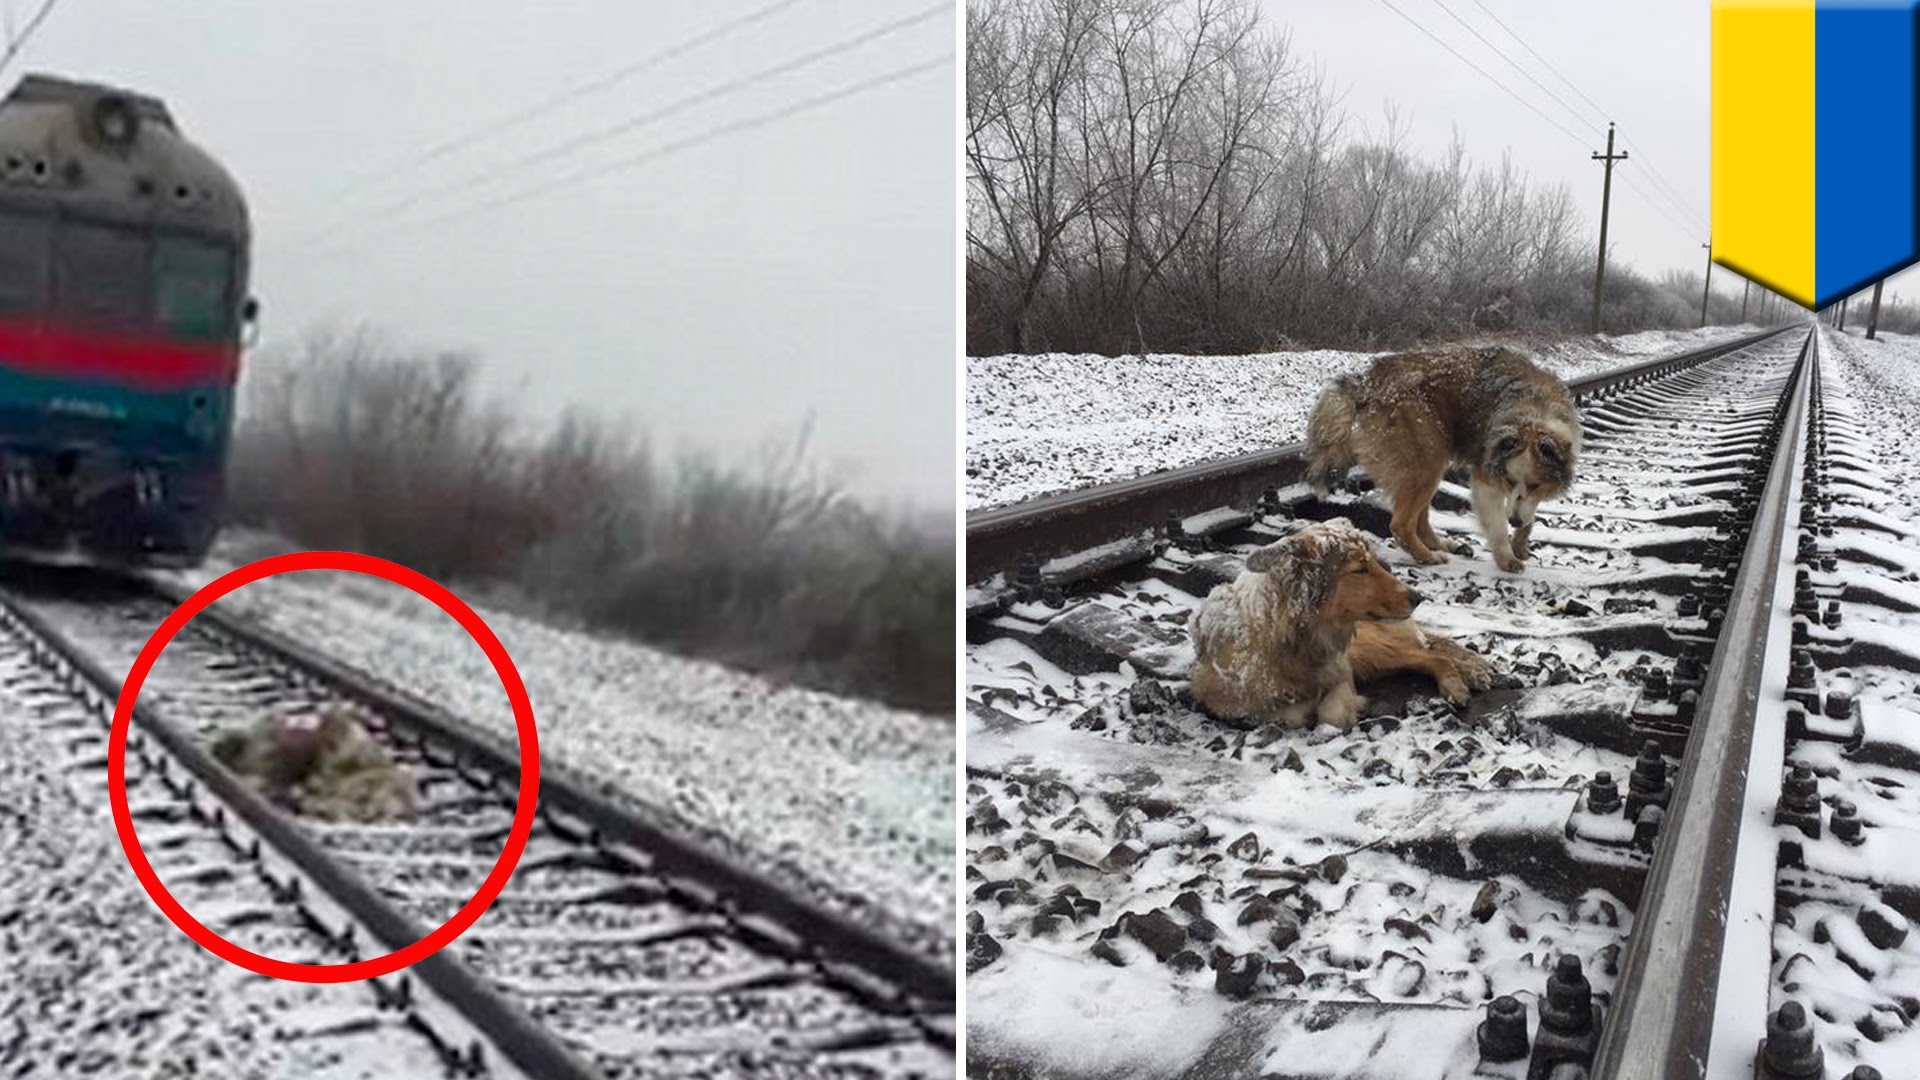 Loyal dog: dog protects injured dog stuck on train tracks for two ...